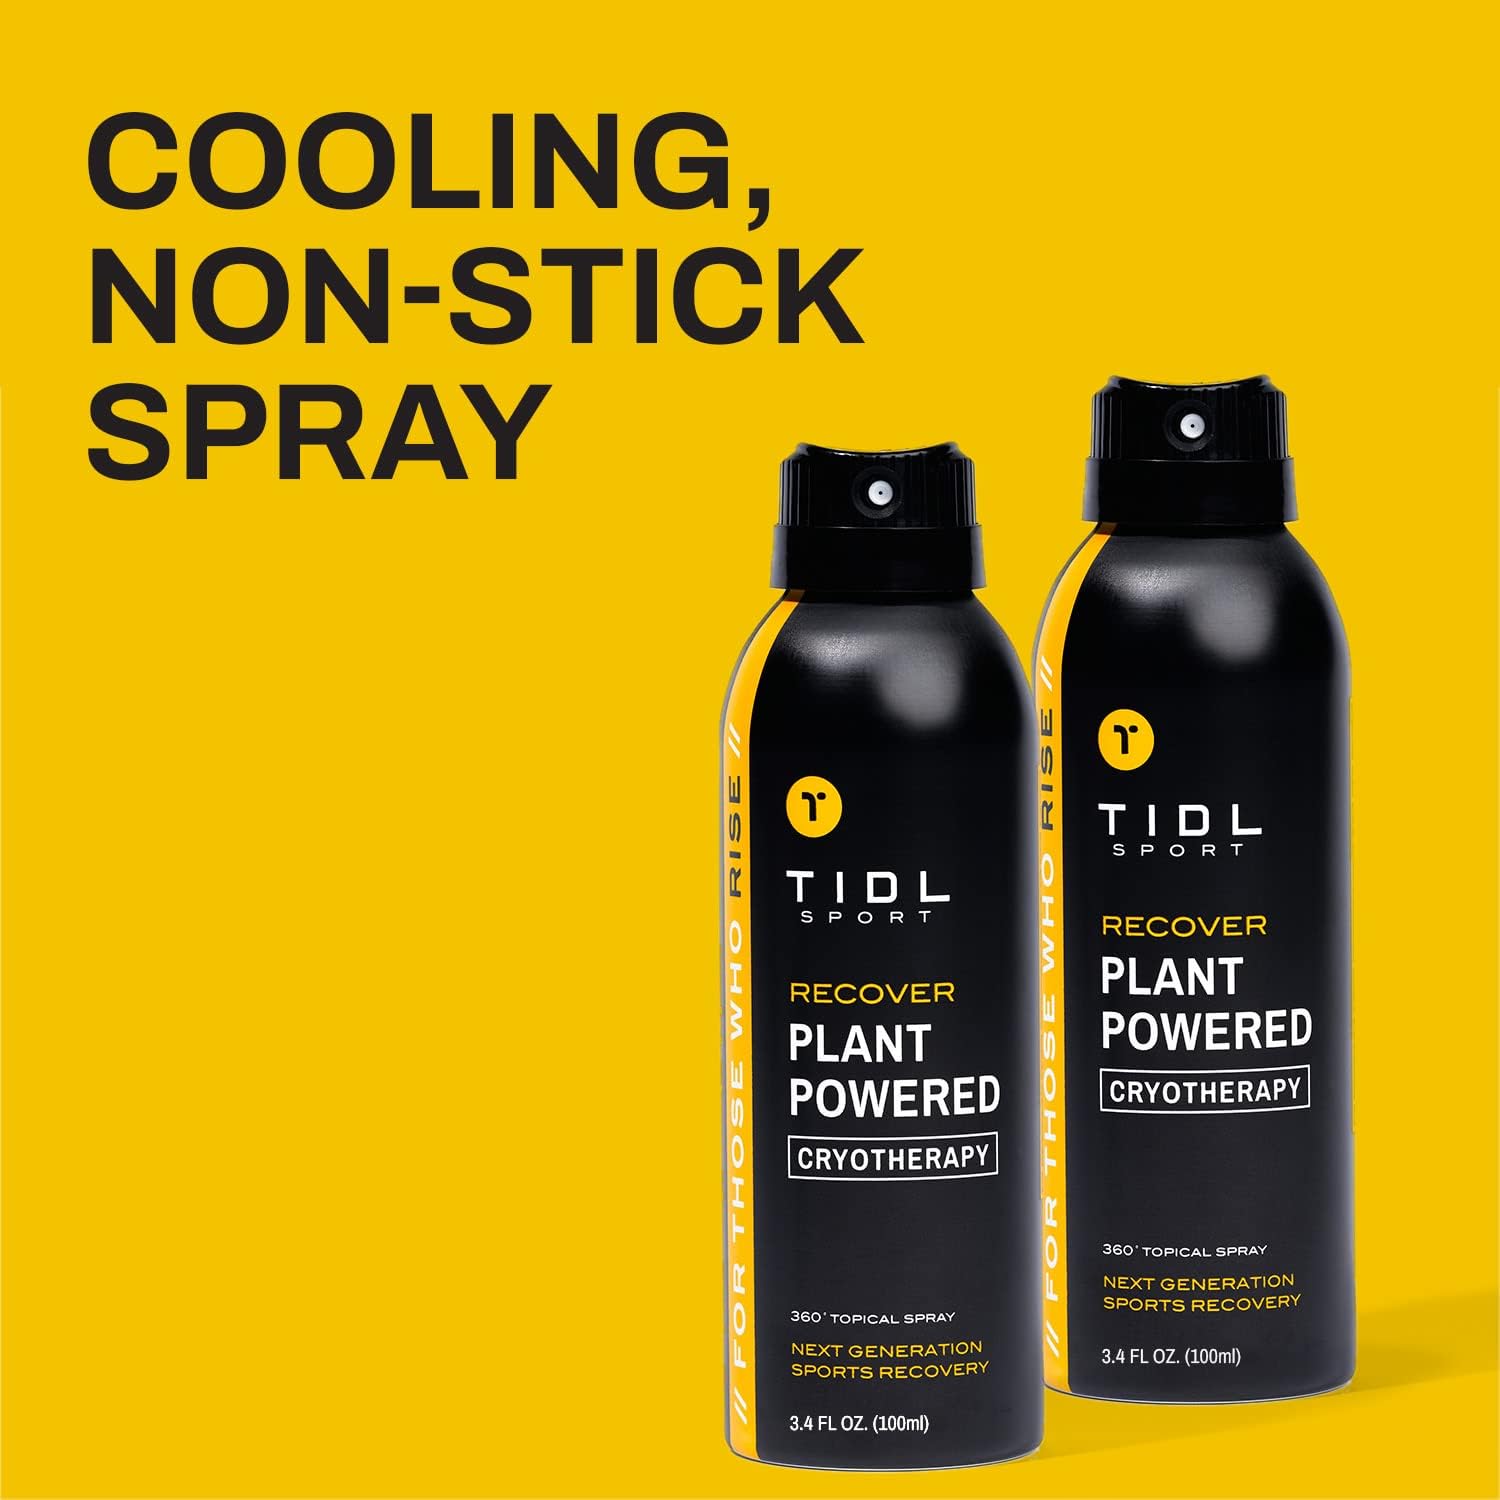 TIDL Plant Powered Cryotherapy Spray 2-Pack – Instant Cooling Pain Relief – Full Body Recovery – Organic Plant-Based Formula – Relieves Muscle and Joint Pain, 3oz : Patio, Lawn & Garden